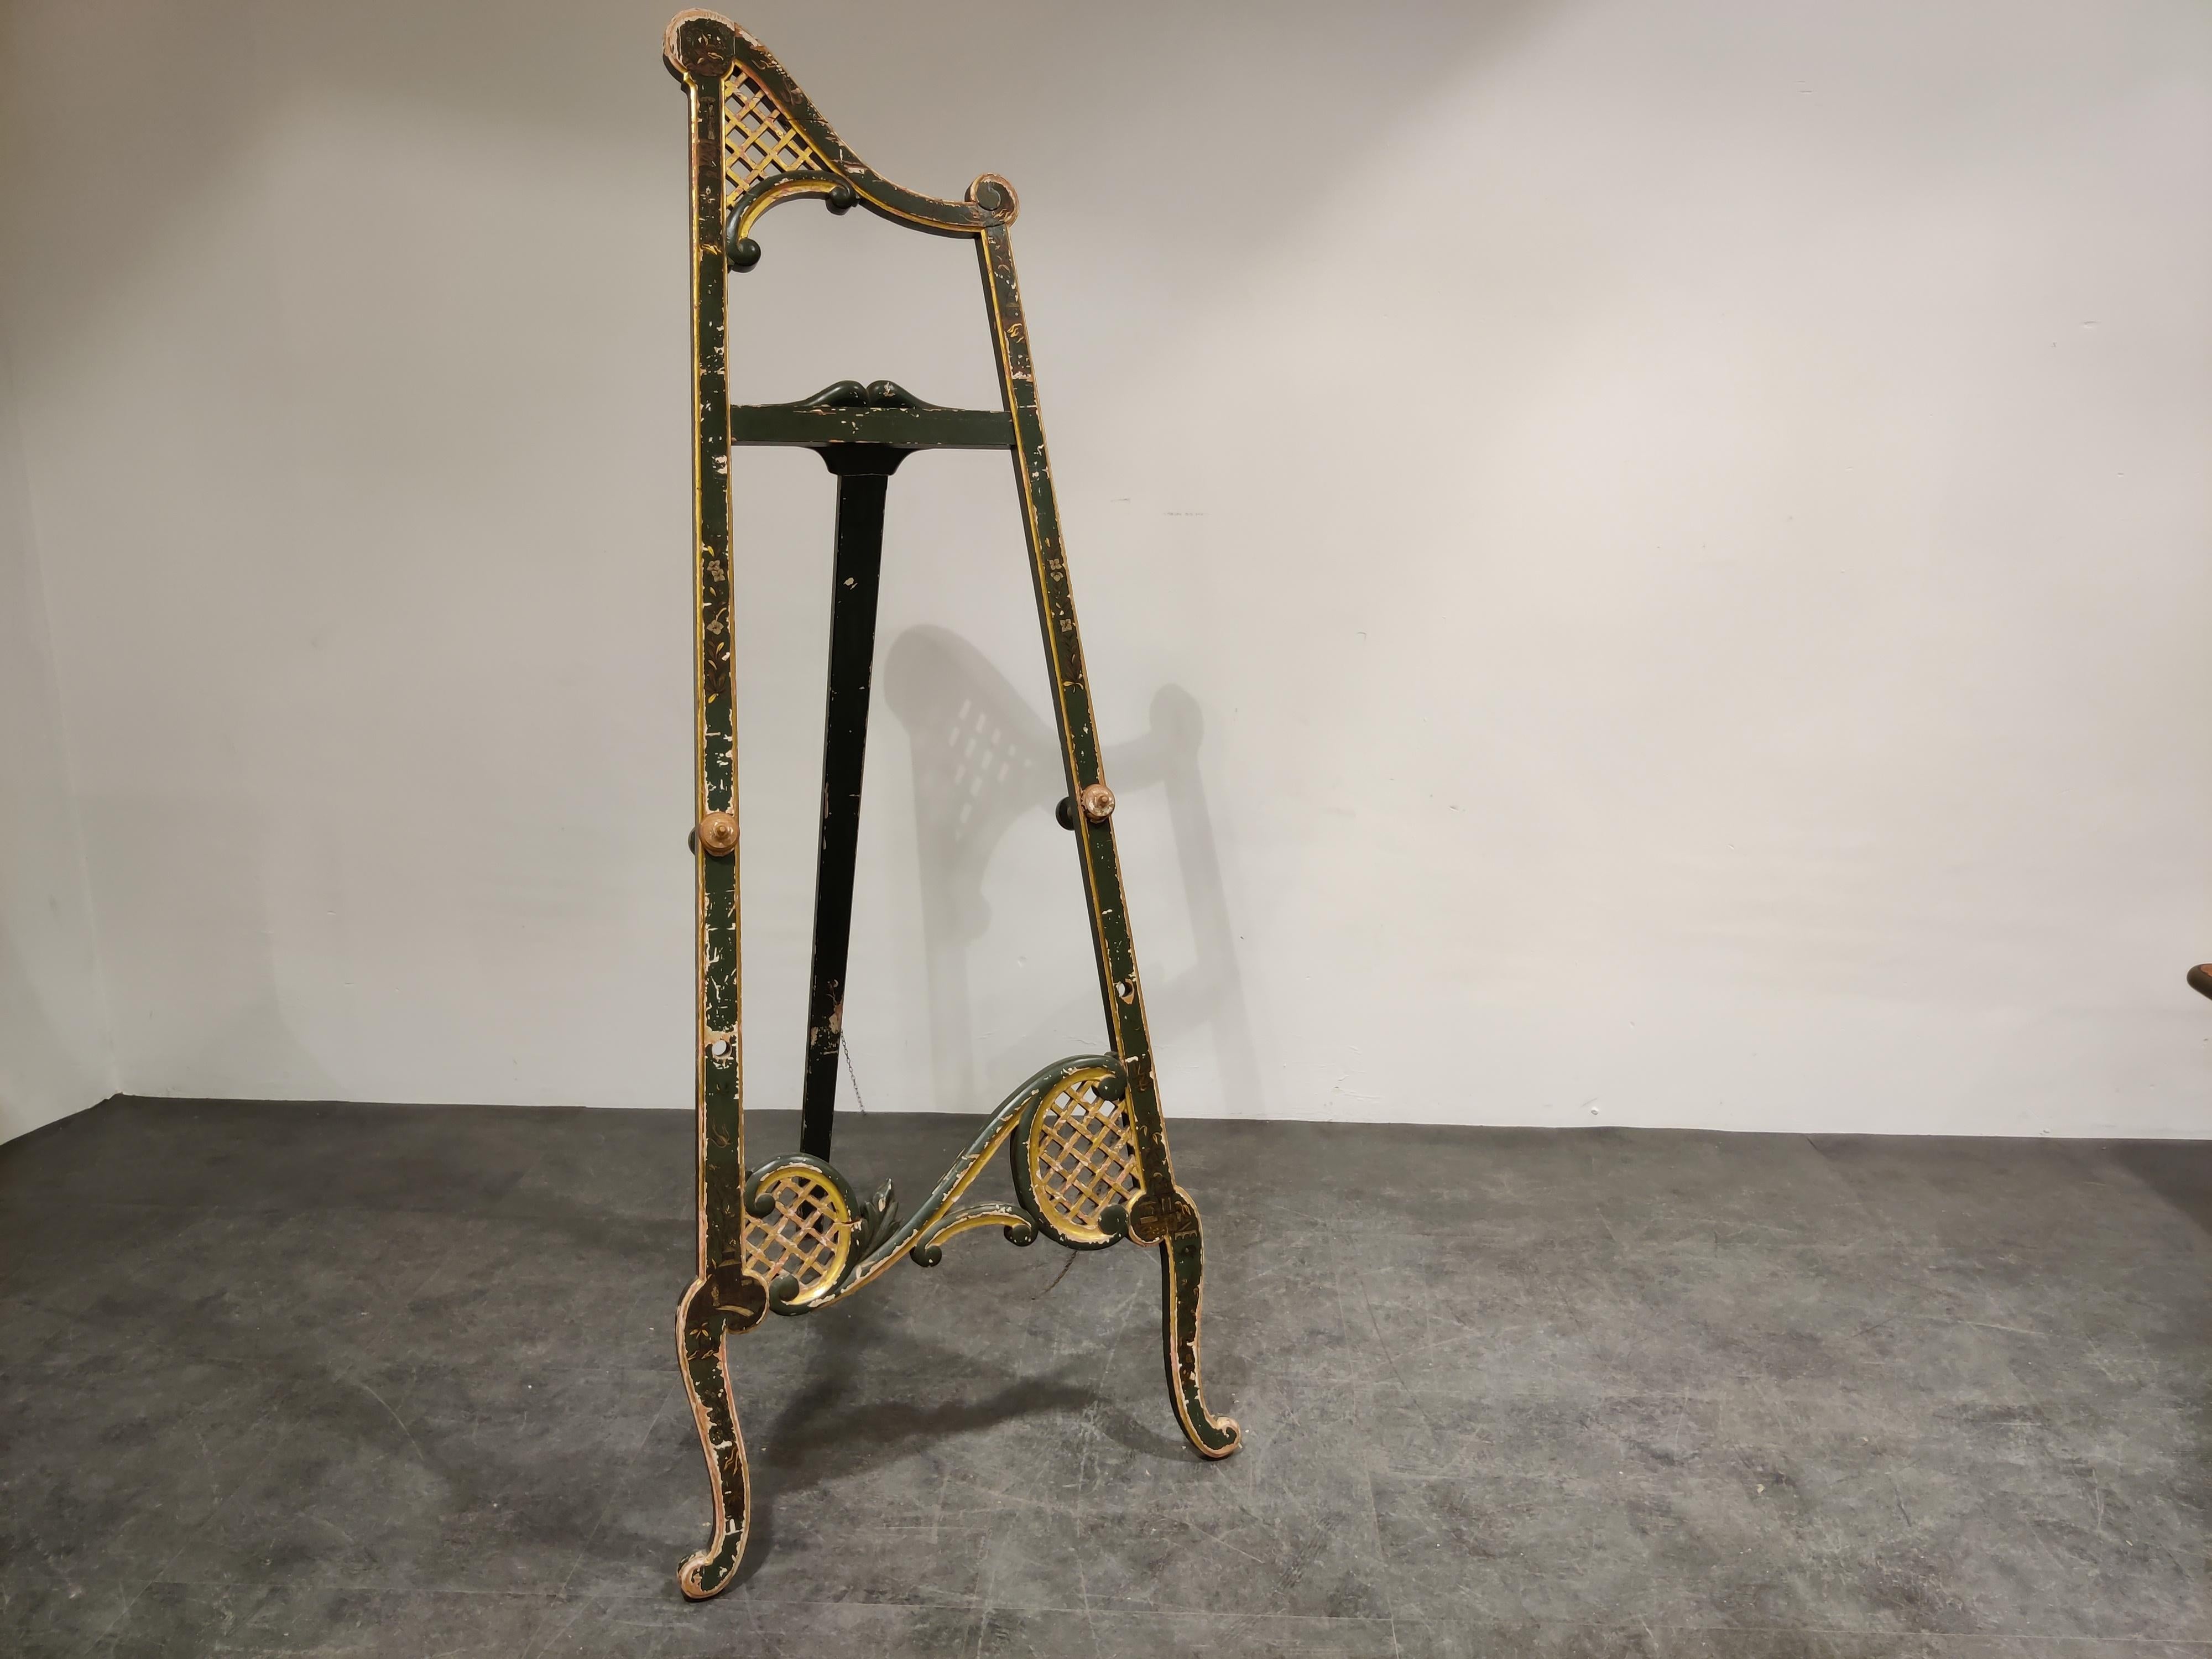 Stunning antique painter's easel in the regency style with chinoiserie drawings.

Beautiful original worn condition which we think is absolutely beautiful.

Very detailed drawings, a piece of art that serves its purpose to create other art,